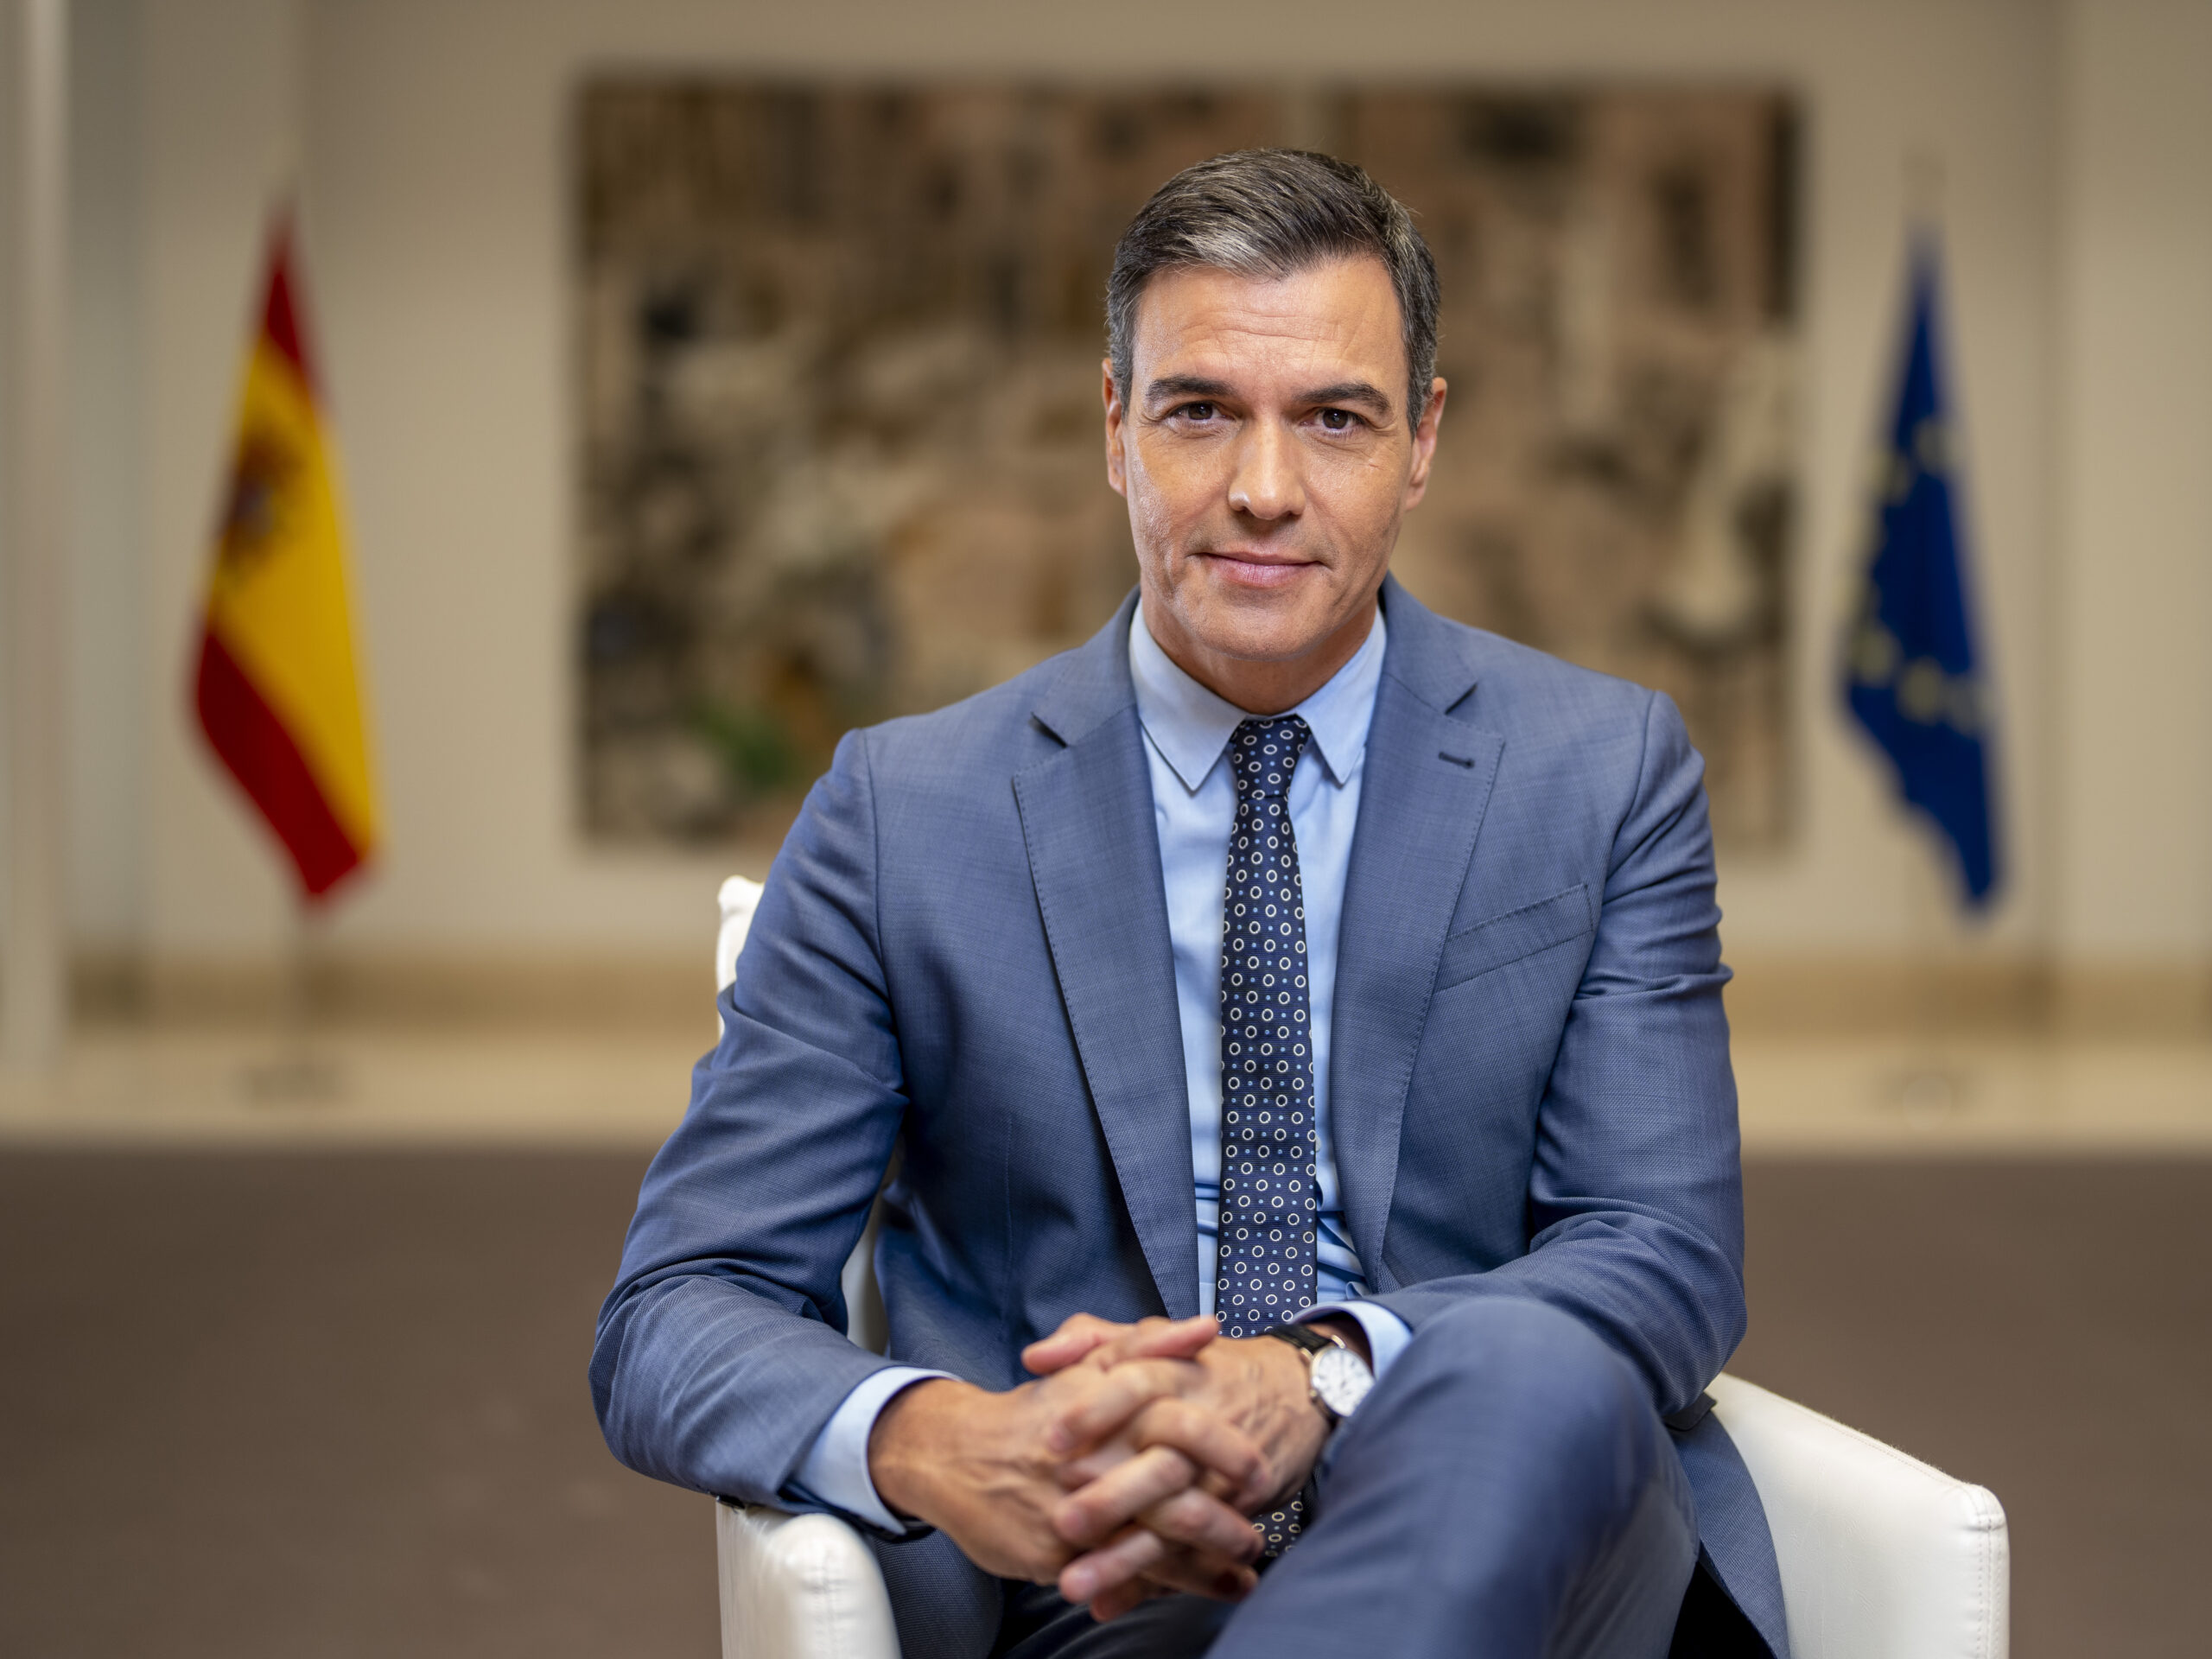 Here’s why Spain’s prime minister Pedro Sánchez is considering stepping down